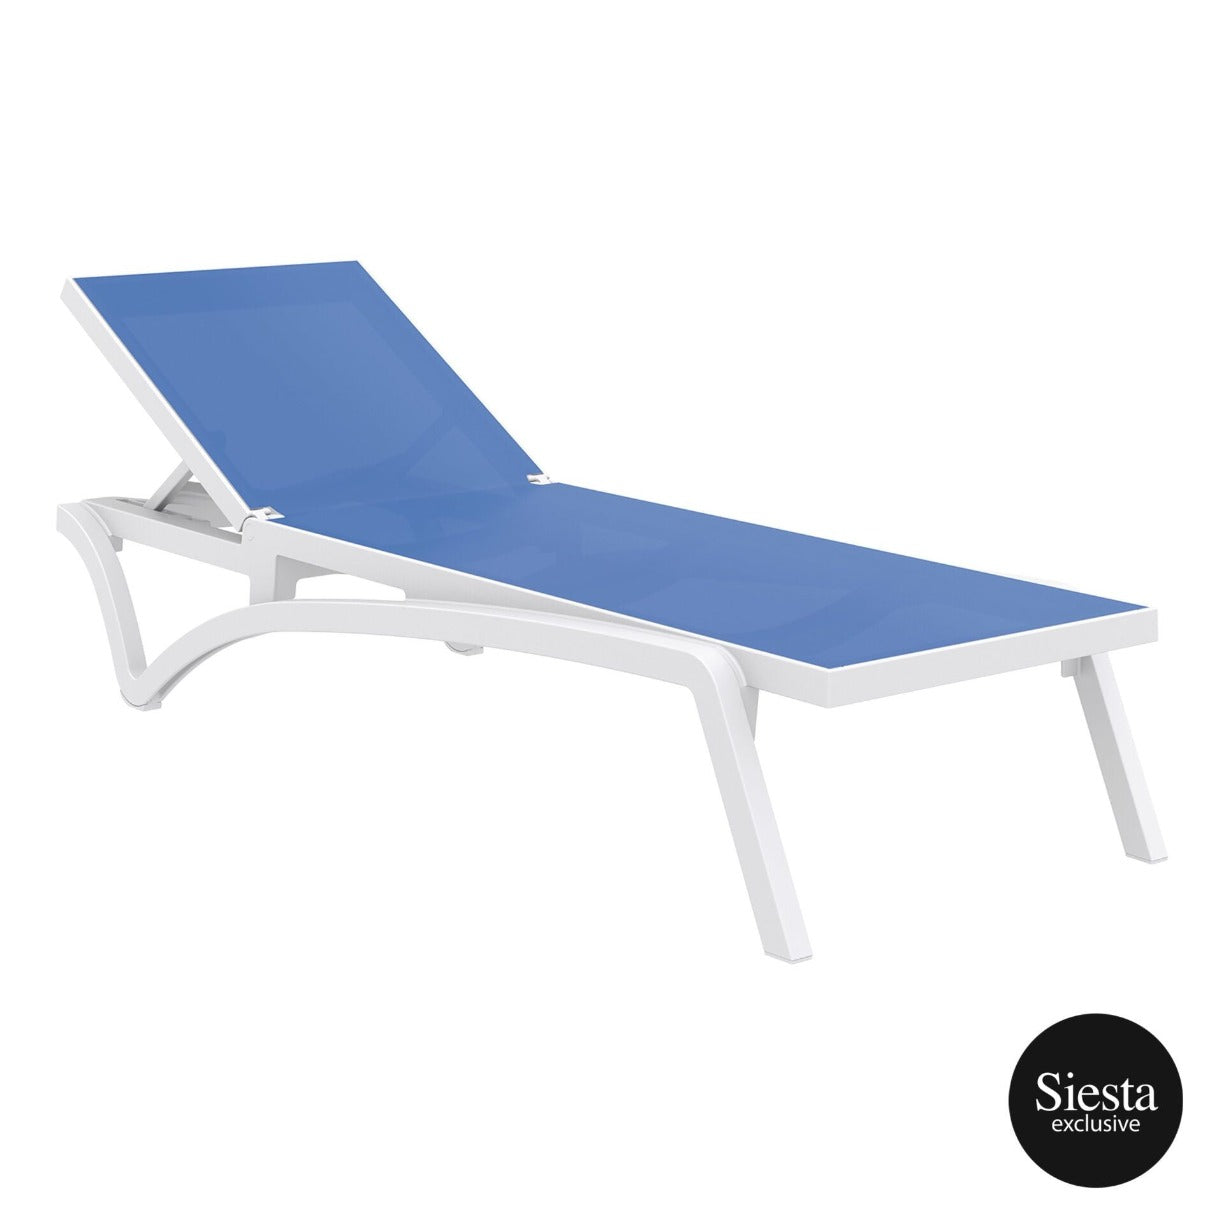 Pacific Sunlounger - White Blue